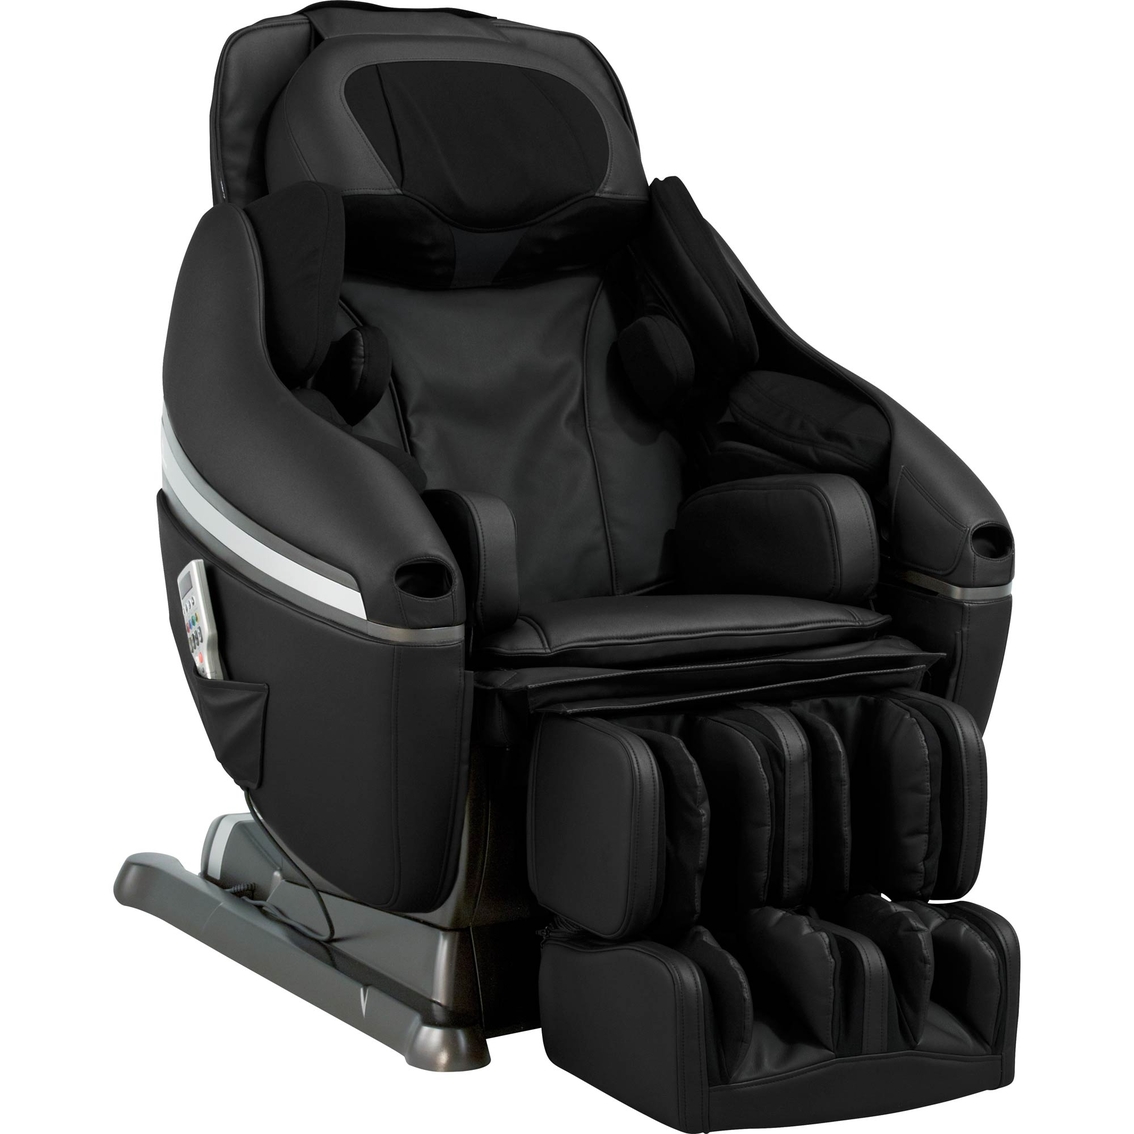 Inada Dreamwave Massage Chair, Black | Chairs & Recliners | Furniture